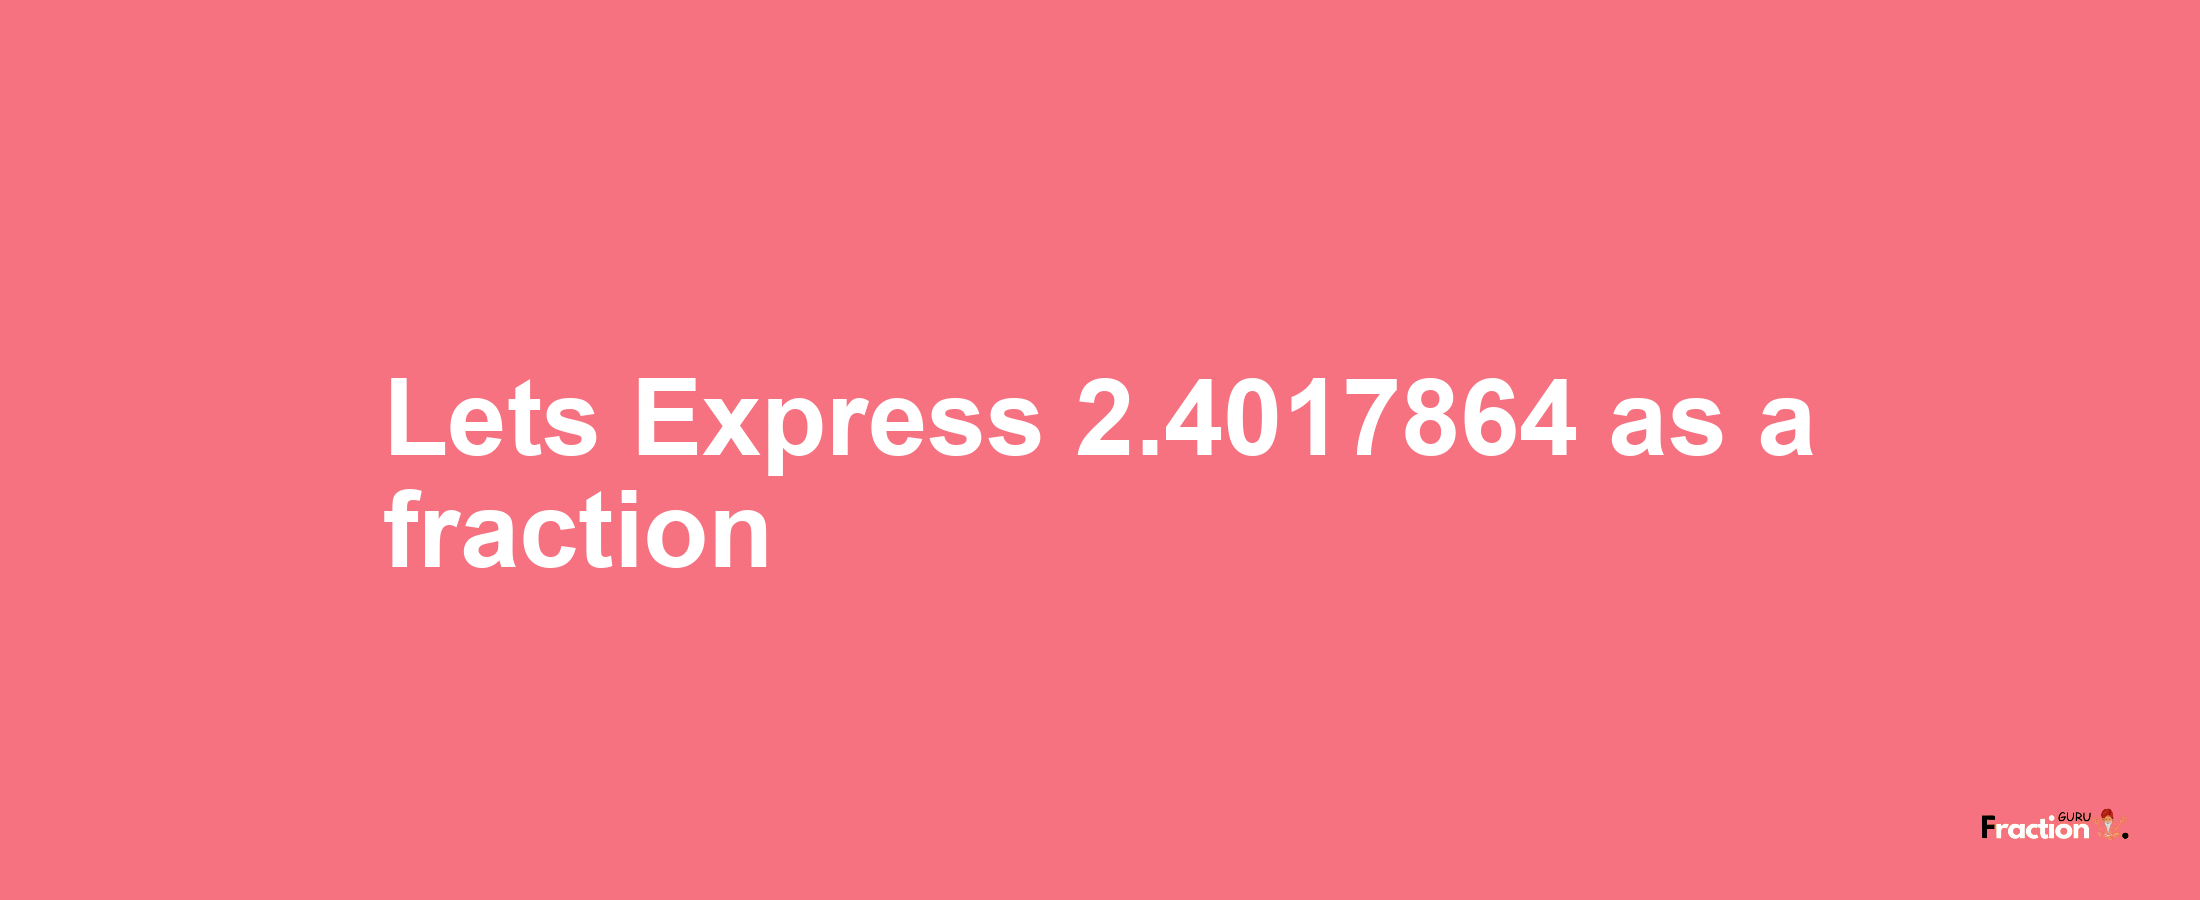 Lets Express 2.4017864 as afraction